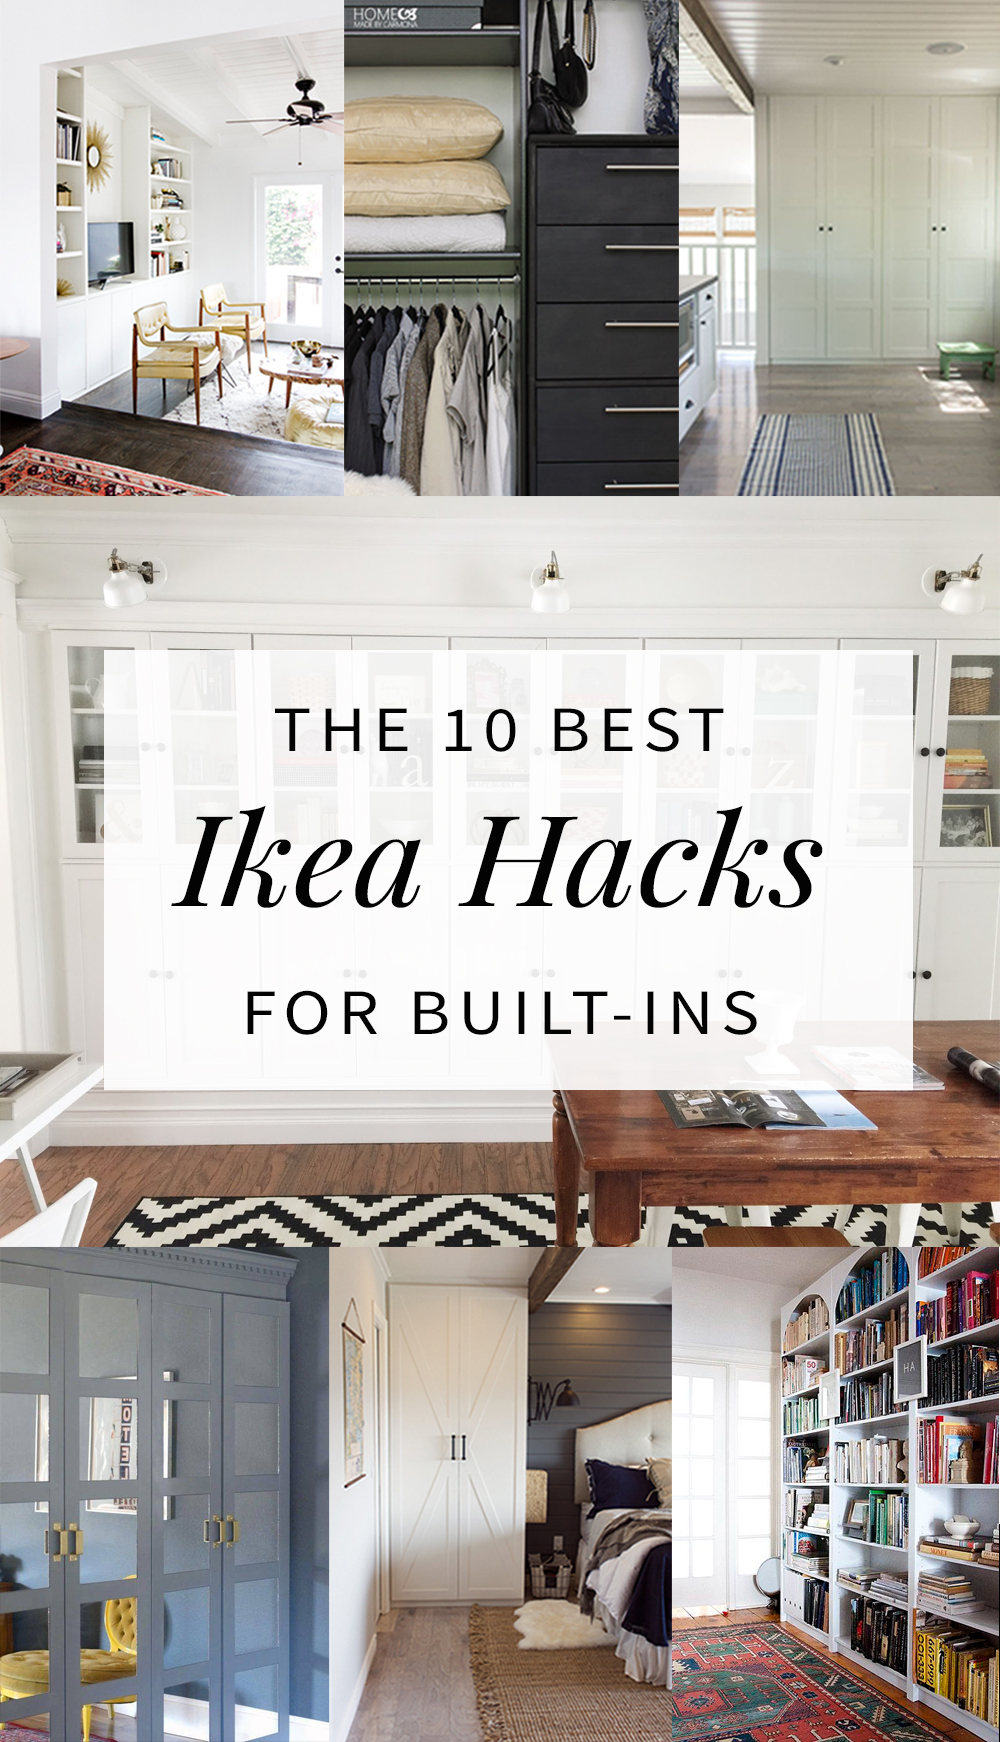 The 10 Best Ikea Hacks for Built Ins